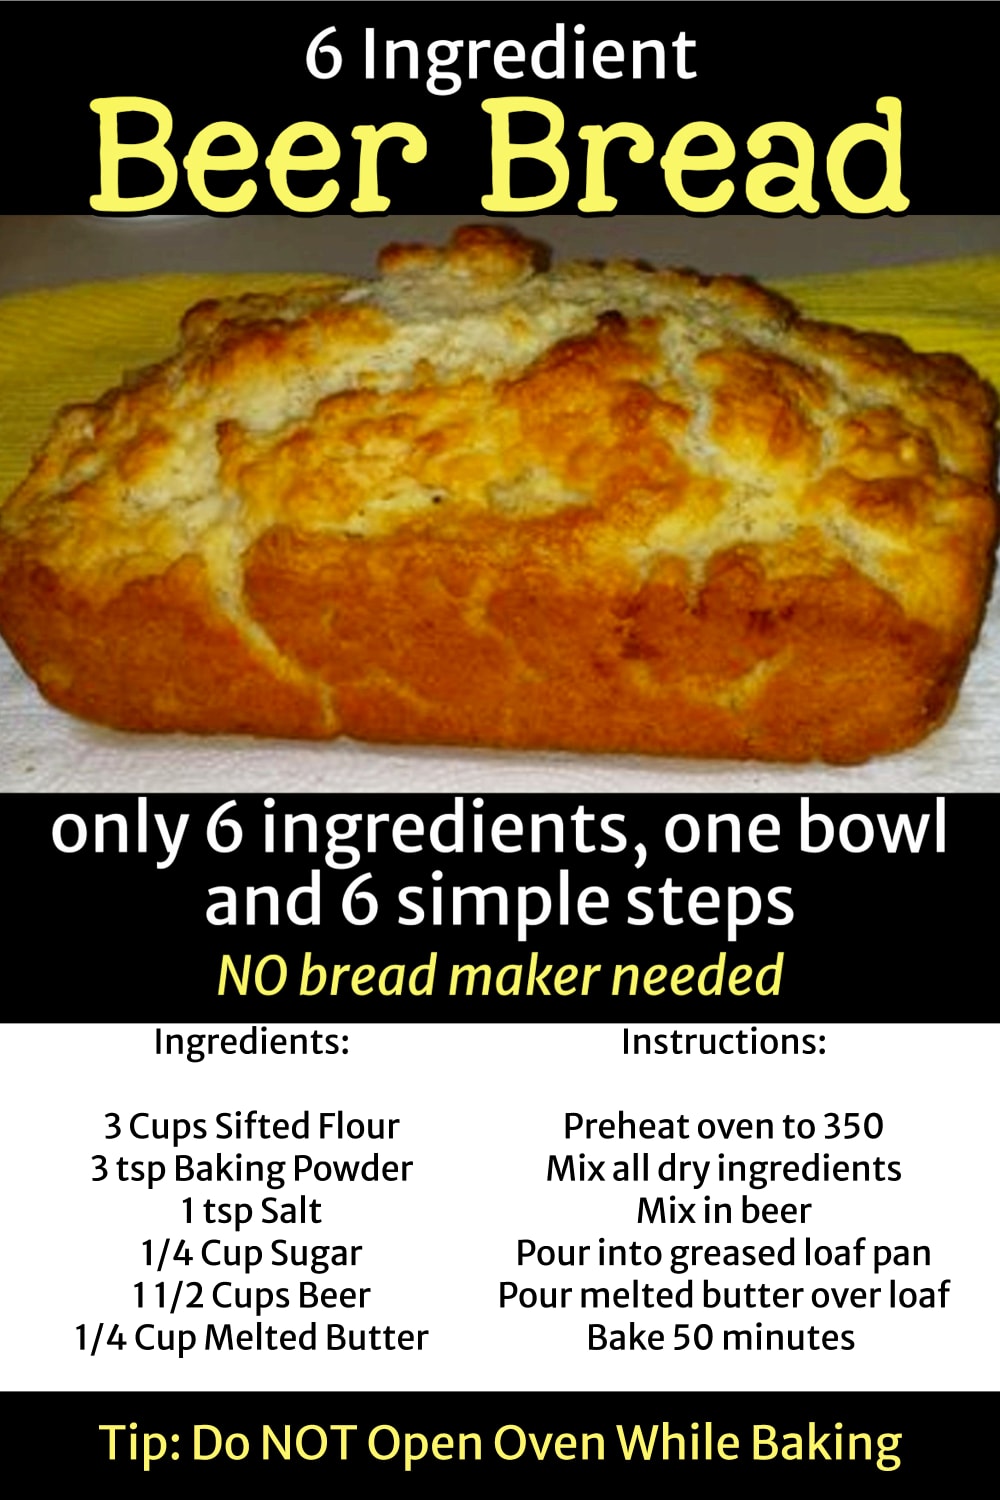 Easy beer bread recipes-NO bread maker needed. Siple 6 ingredient beer bread recipes. 6 simple steps and mixed in ONE bowl. Unique beer bread recipes variations that are so simple to make